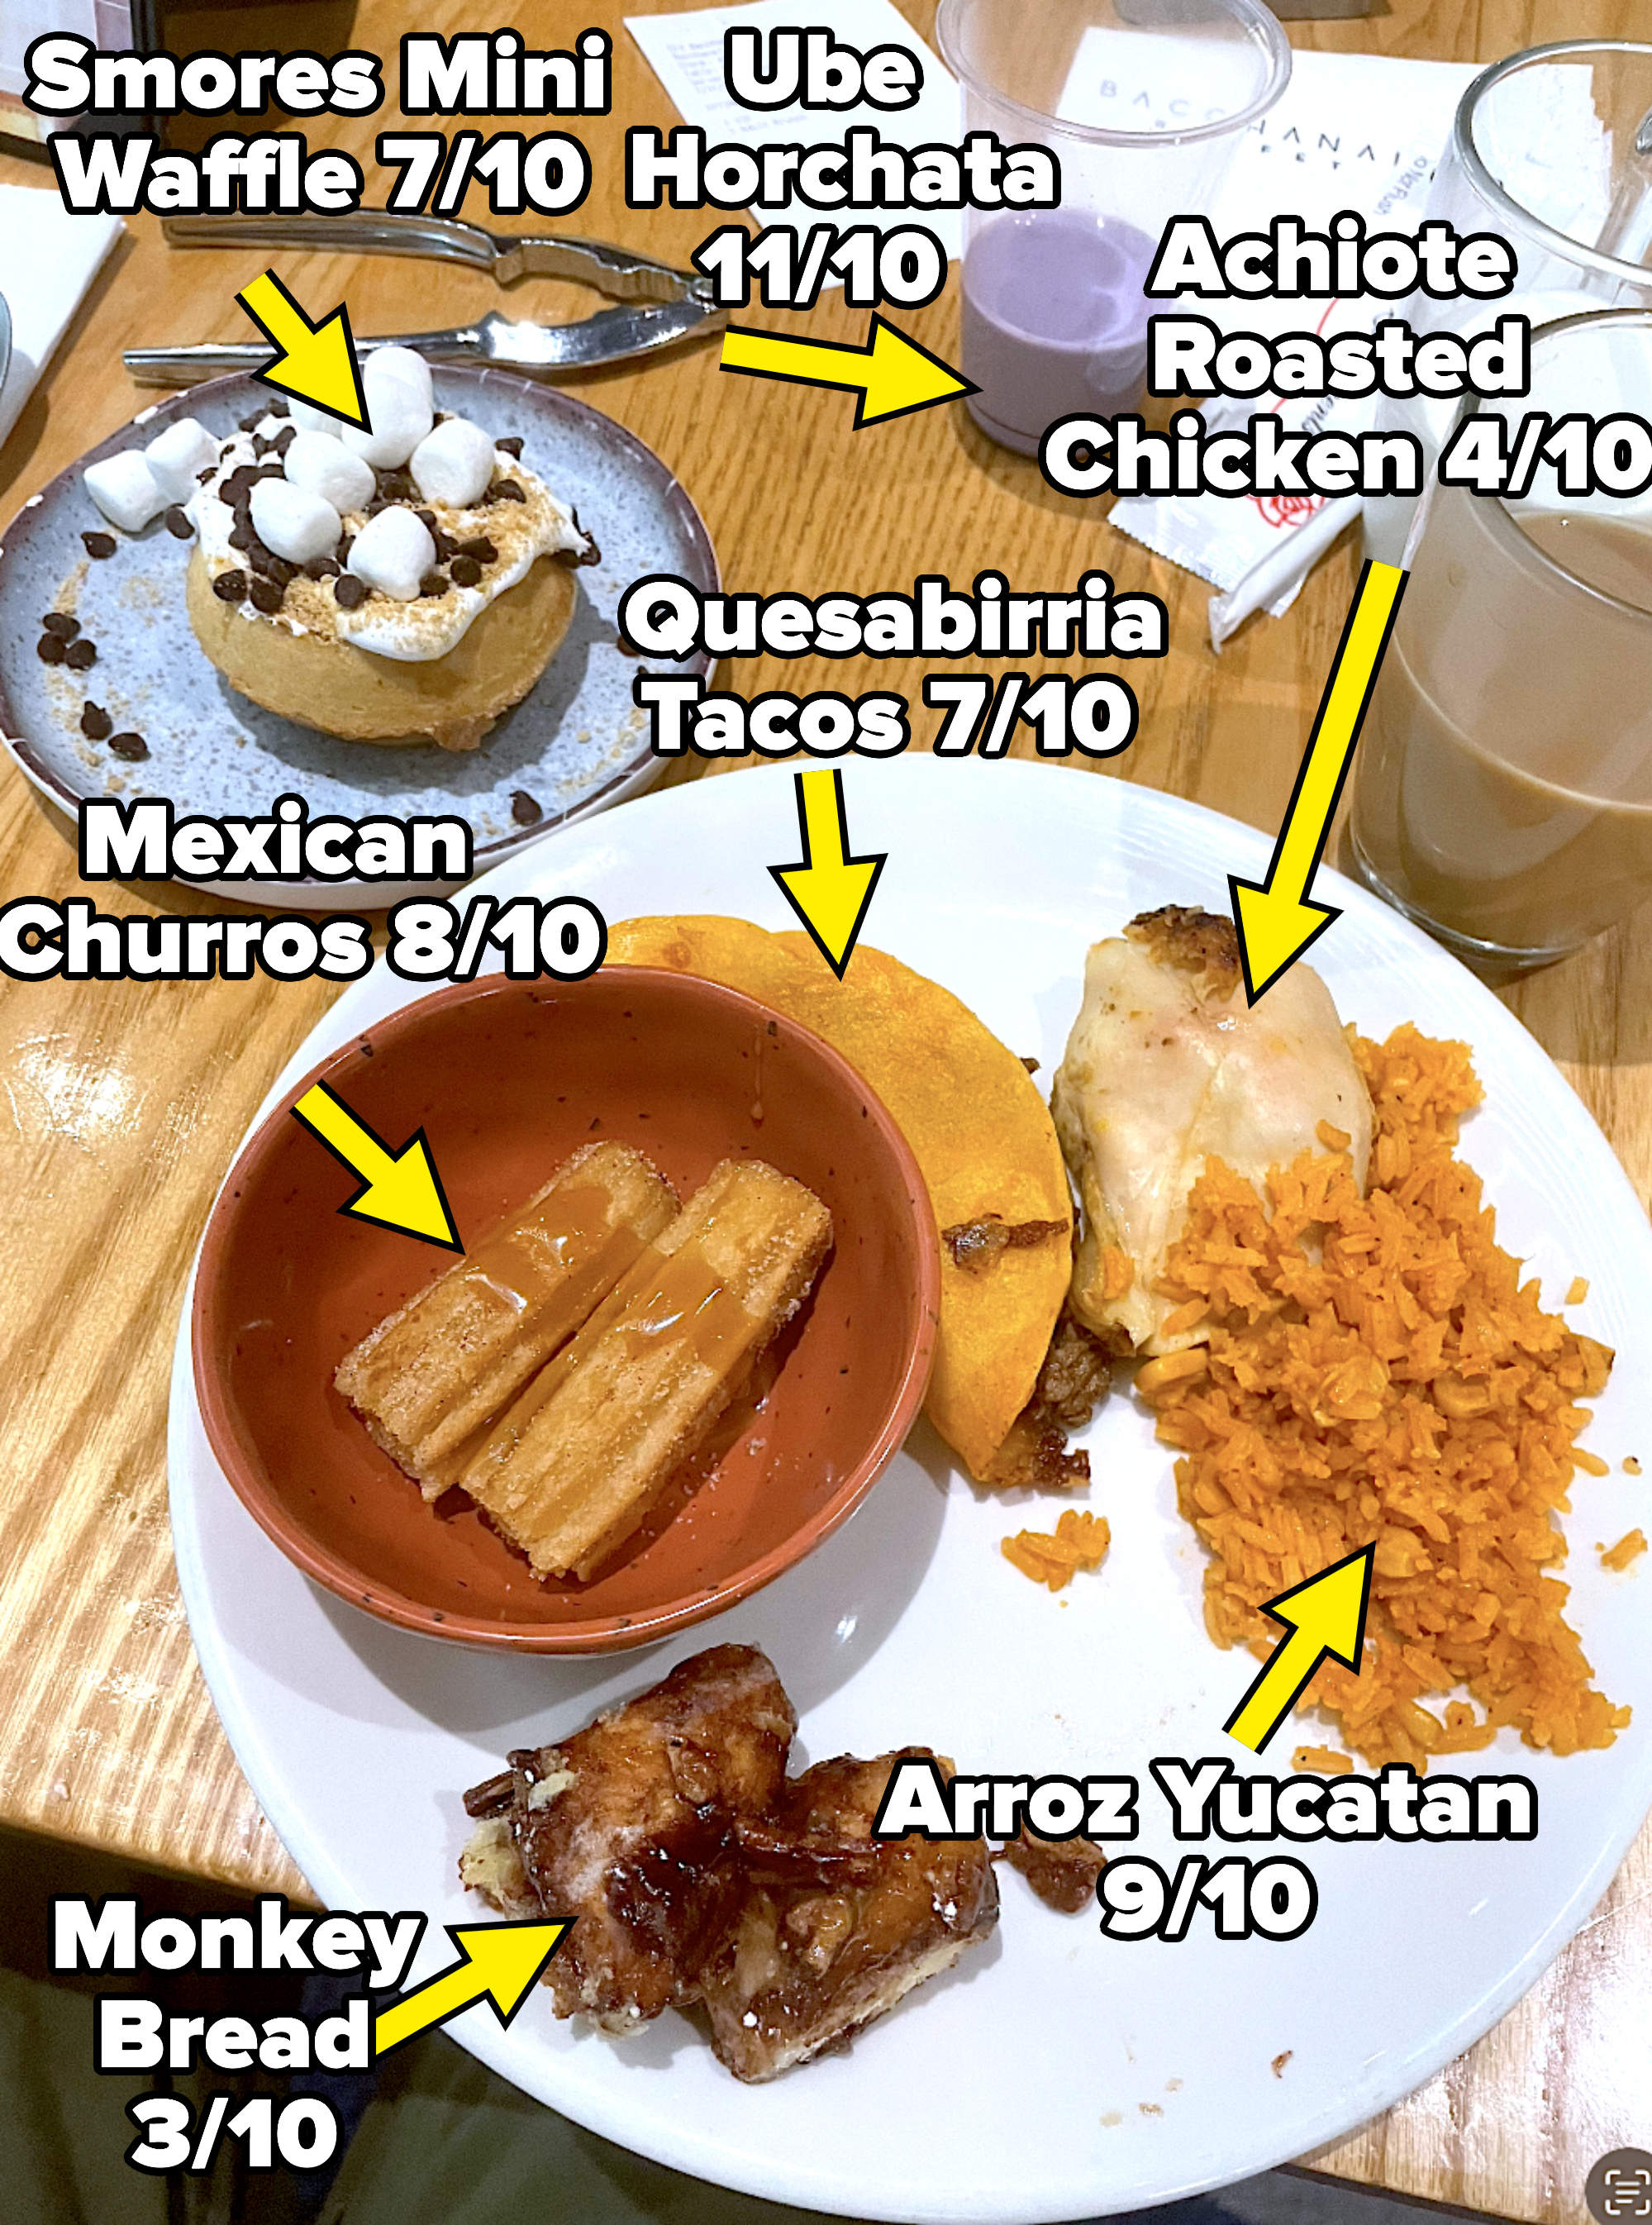 Plates and cups with arrows pointing to each item to provide; the lowest rating is a 3, while the highest rating is an 11